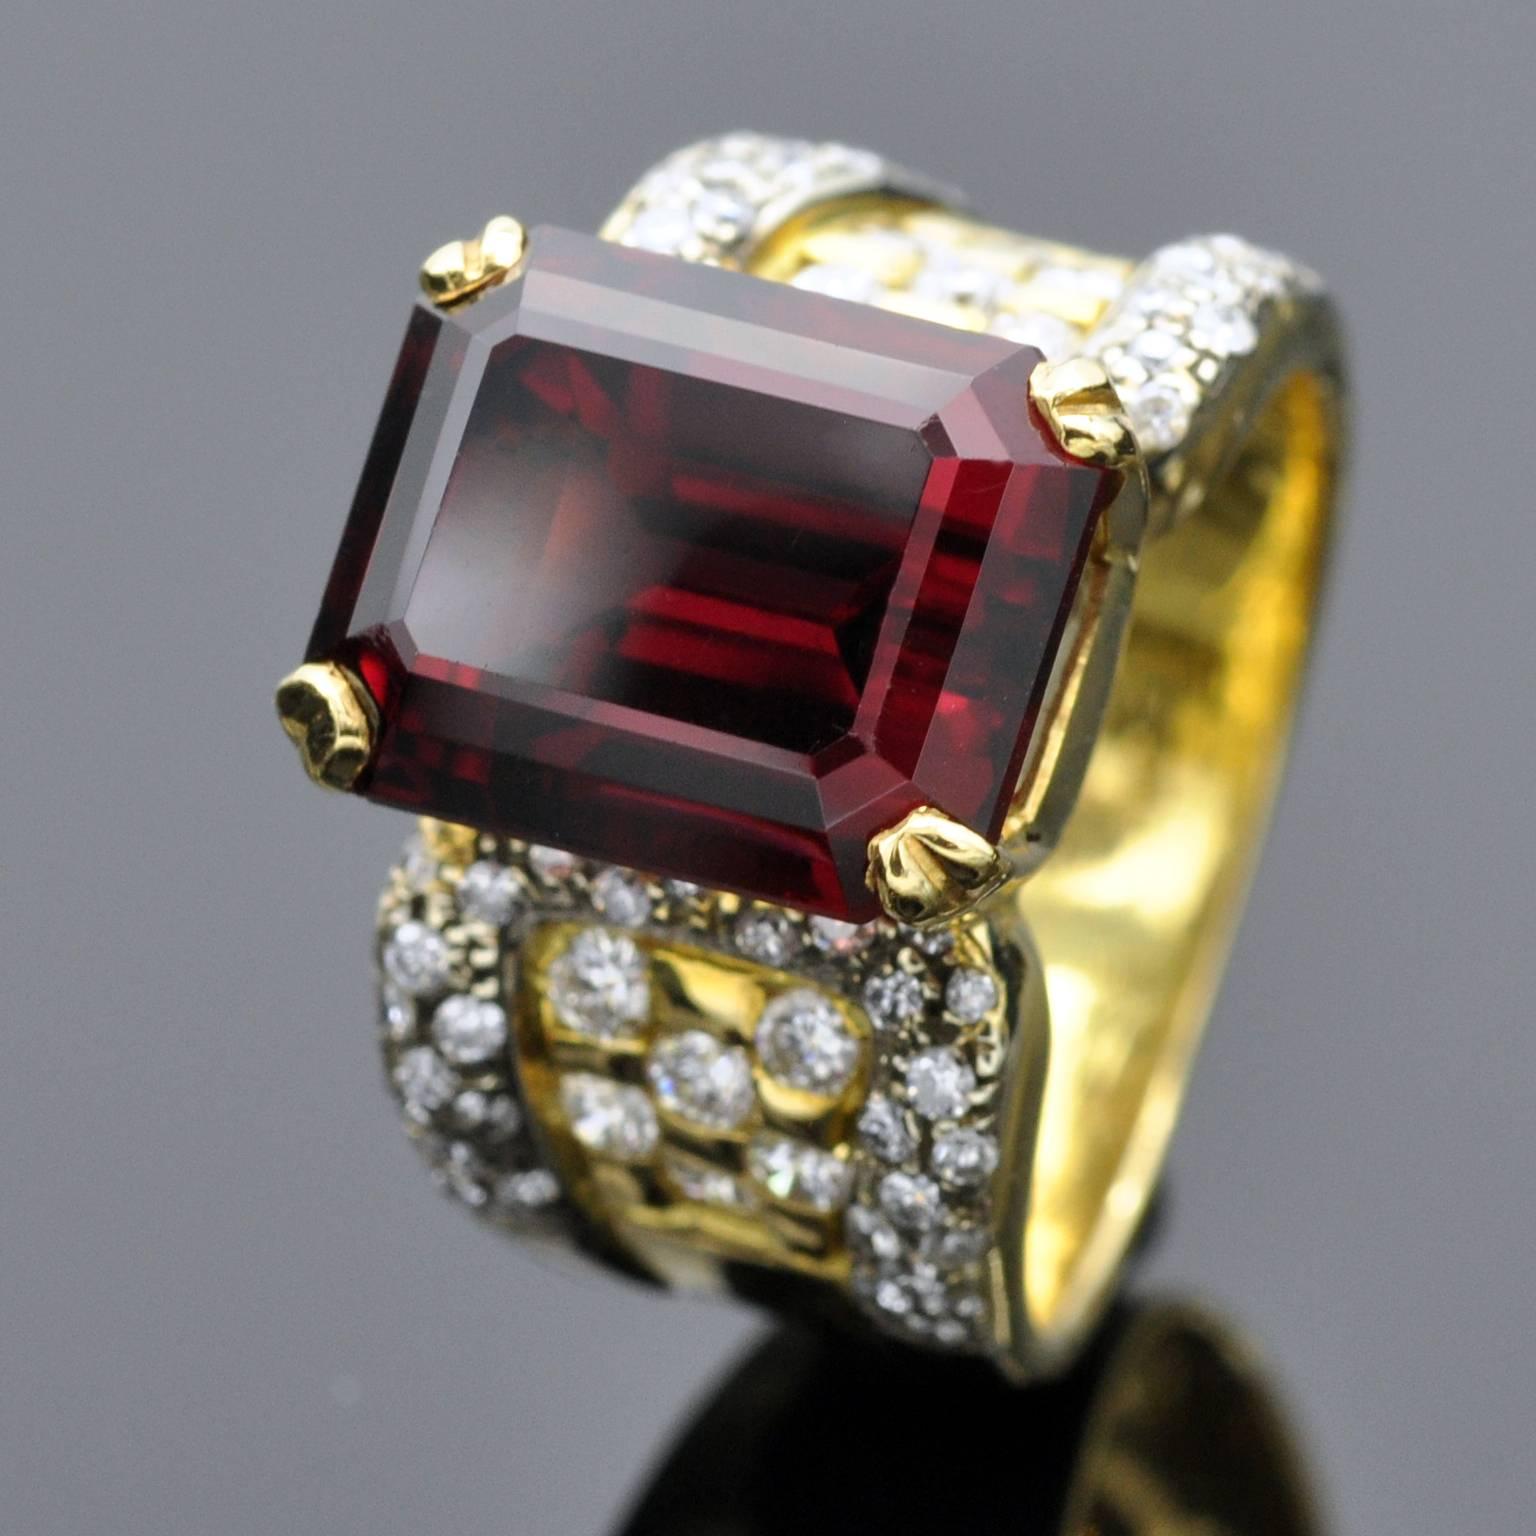 An emerald cut garnet prong set on a yellow and white gold cocktail ring. The garnet has has a dee rich purplish red color with a high brilliance, it weighs 10,40 carats. The diamonds: are approximately 1 carat, G VS .